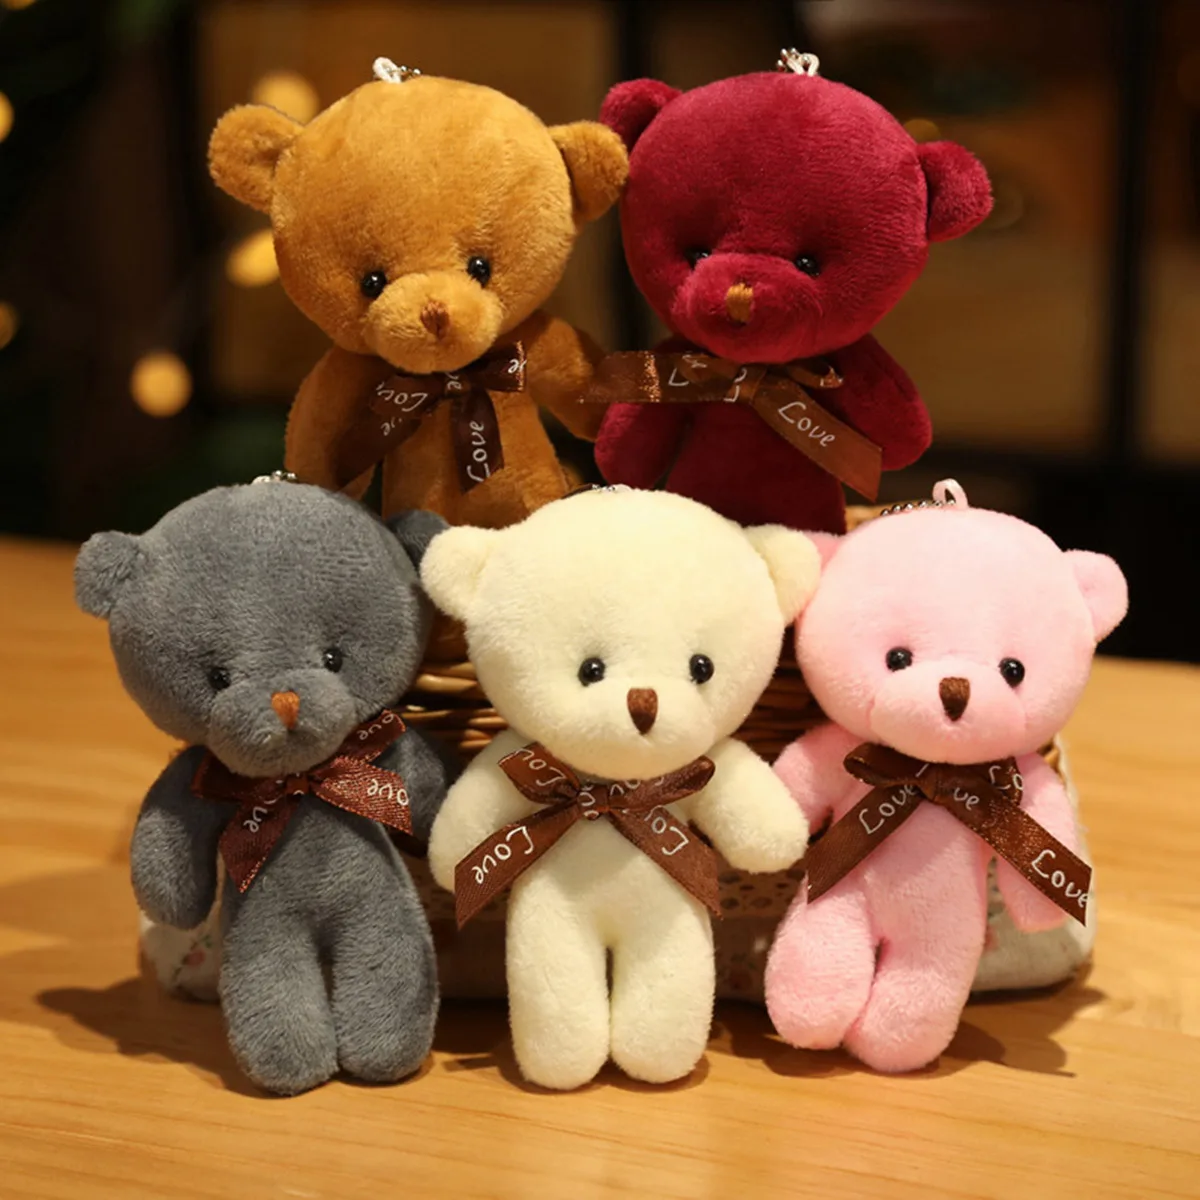 New Color Teddy Bear Dolls 12cm Soft Stuffed Animals Bear Plush Toy Pendent Cute Cute Girl Keychain Wedding Children Party Gifts 100pcs royal blue organza gift bags 9 12cm hot stamping organza wedding party favor gift bag jewelry packaging pouches earring